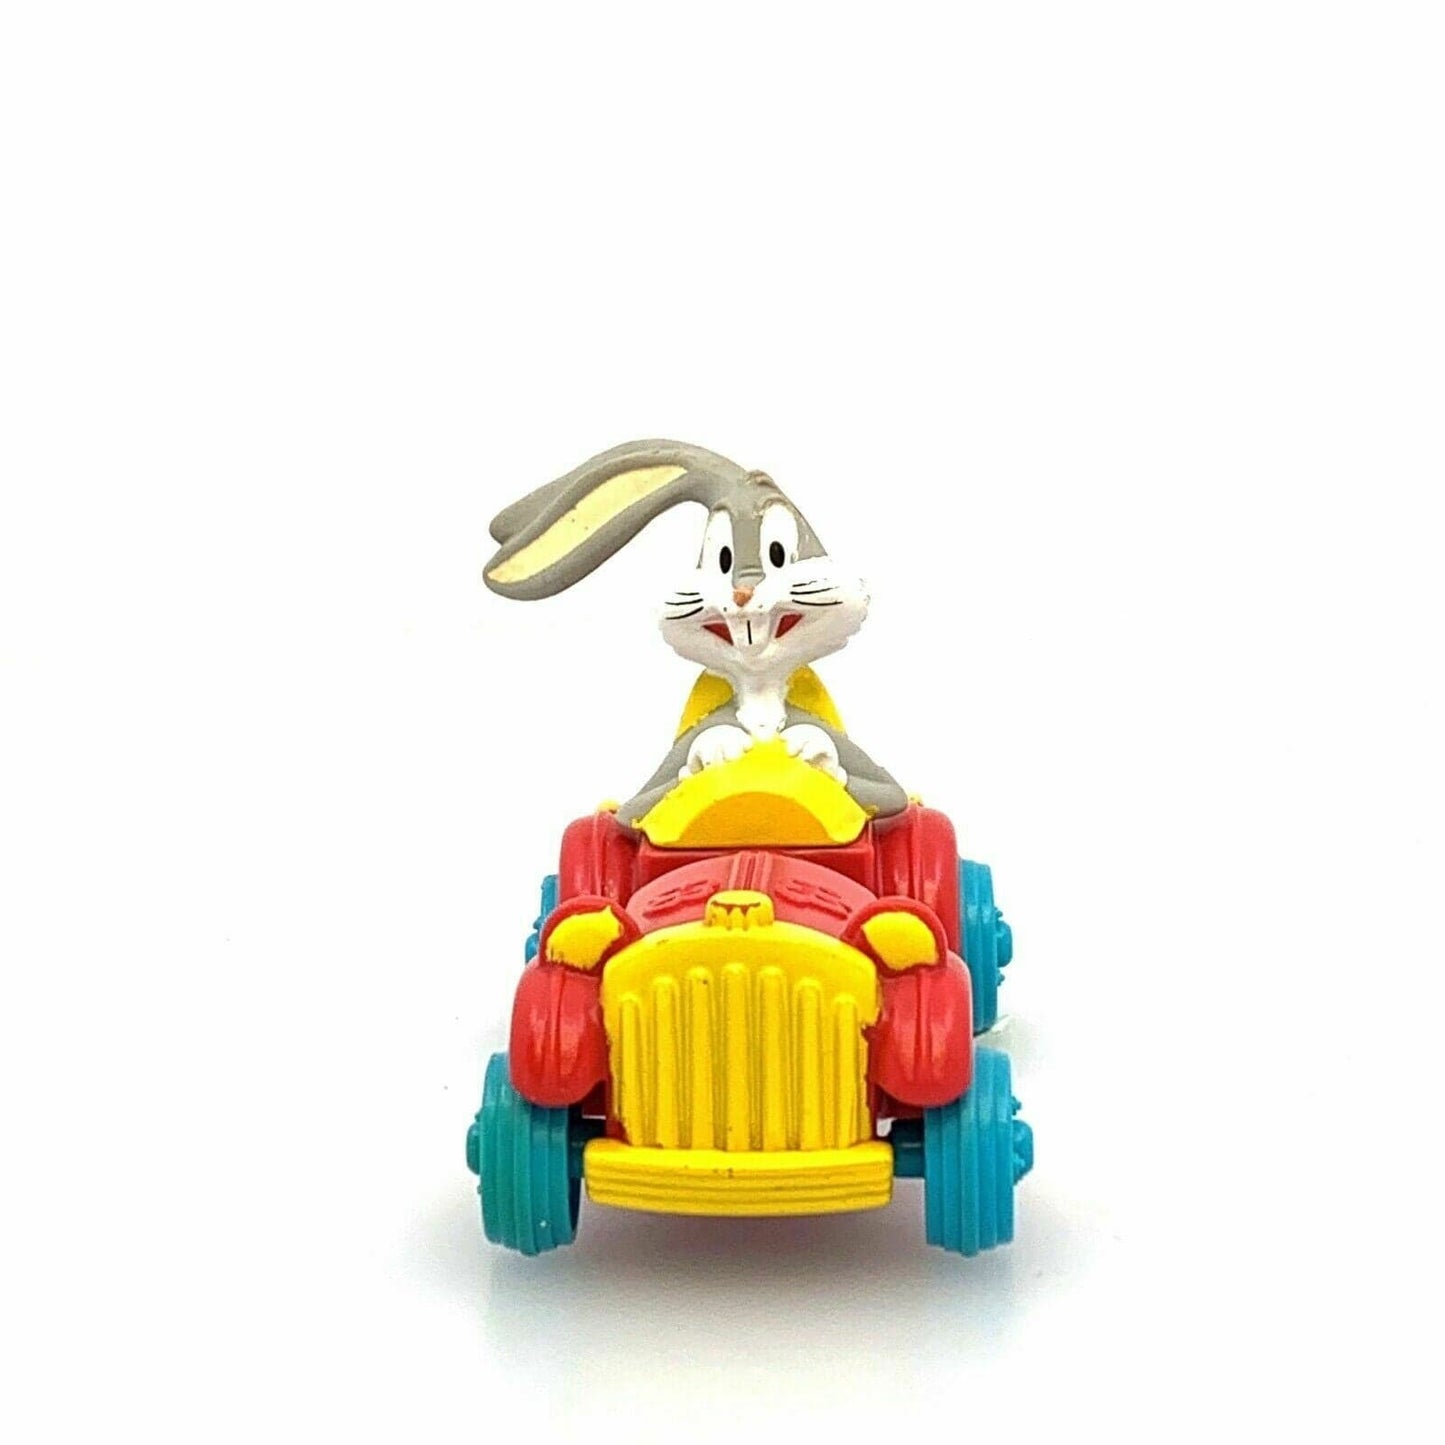 Nostalgic Warner Bros Vintage Bugs Bunny Stretching Limo Toy Car Very Good Used 1992 McDonalds Happy Meal Toy